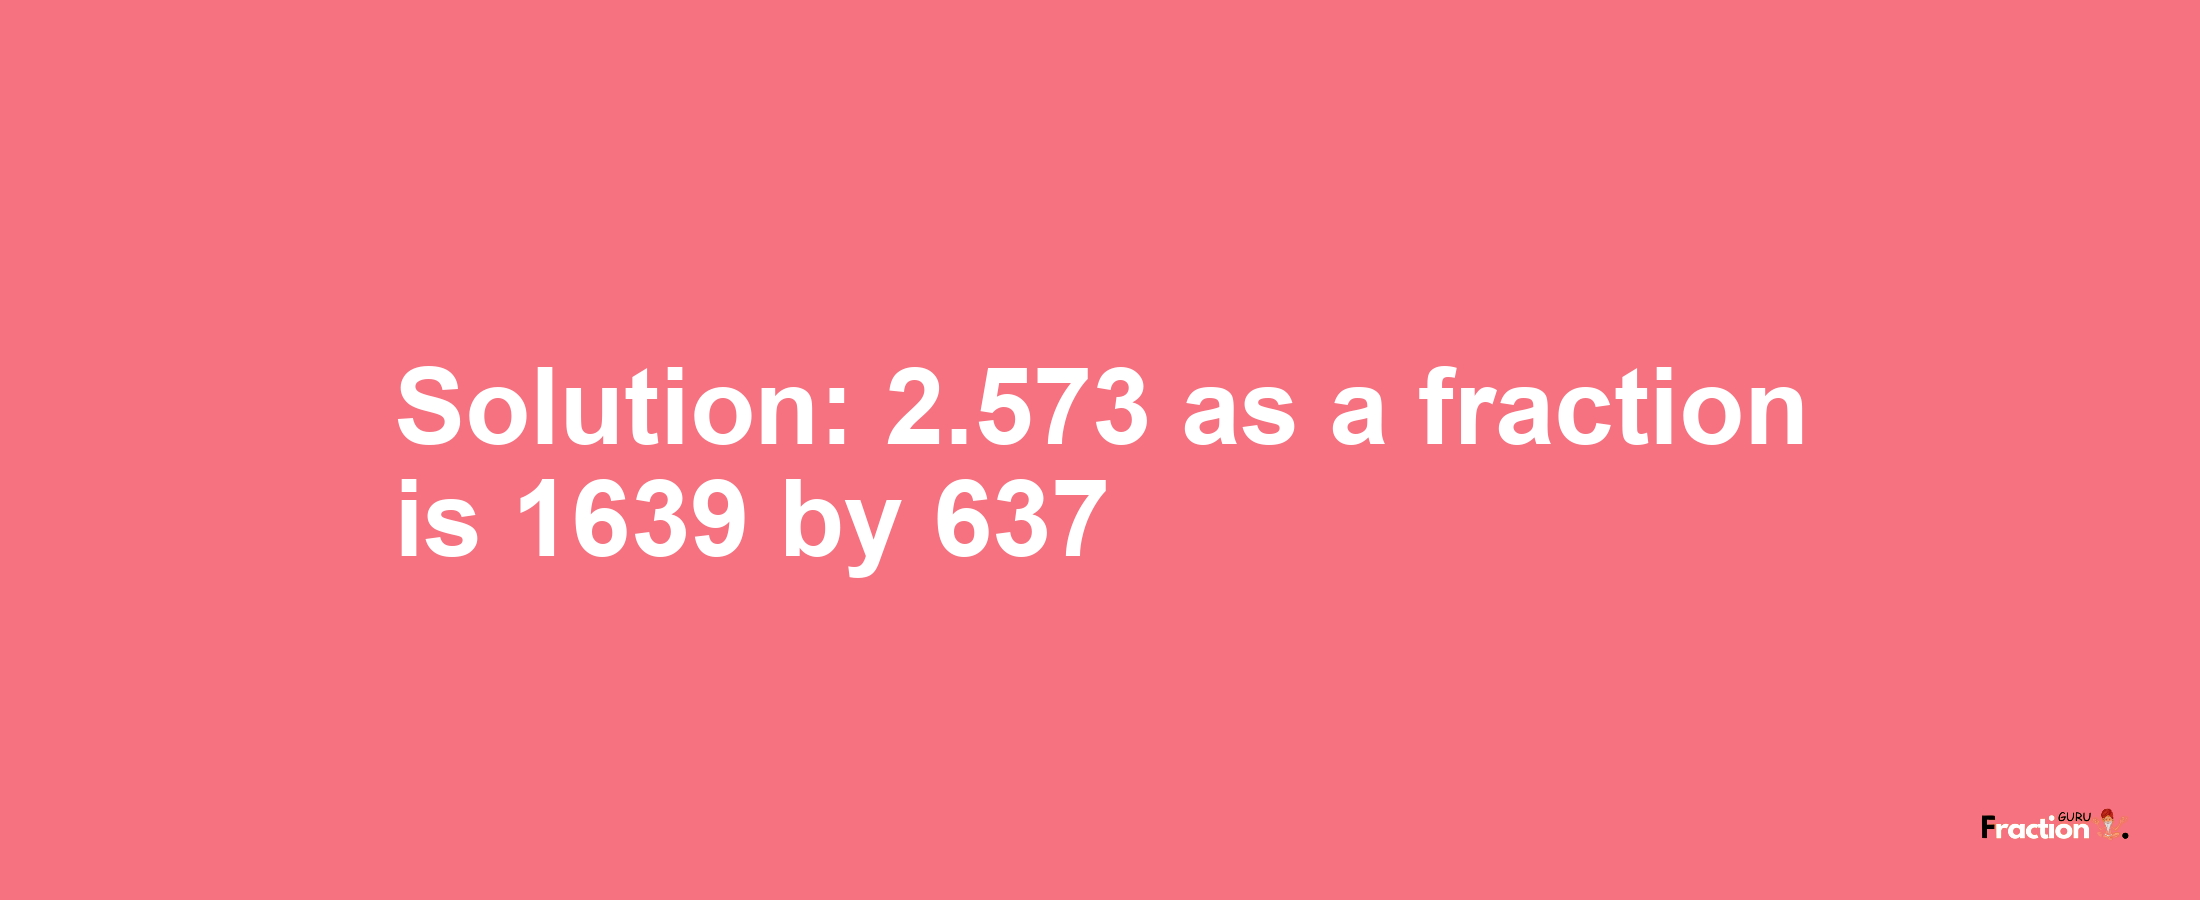 Solution:2.573 as a fraction is 1639/637